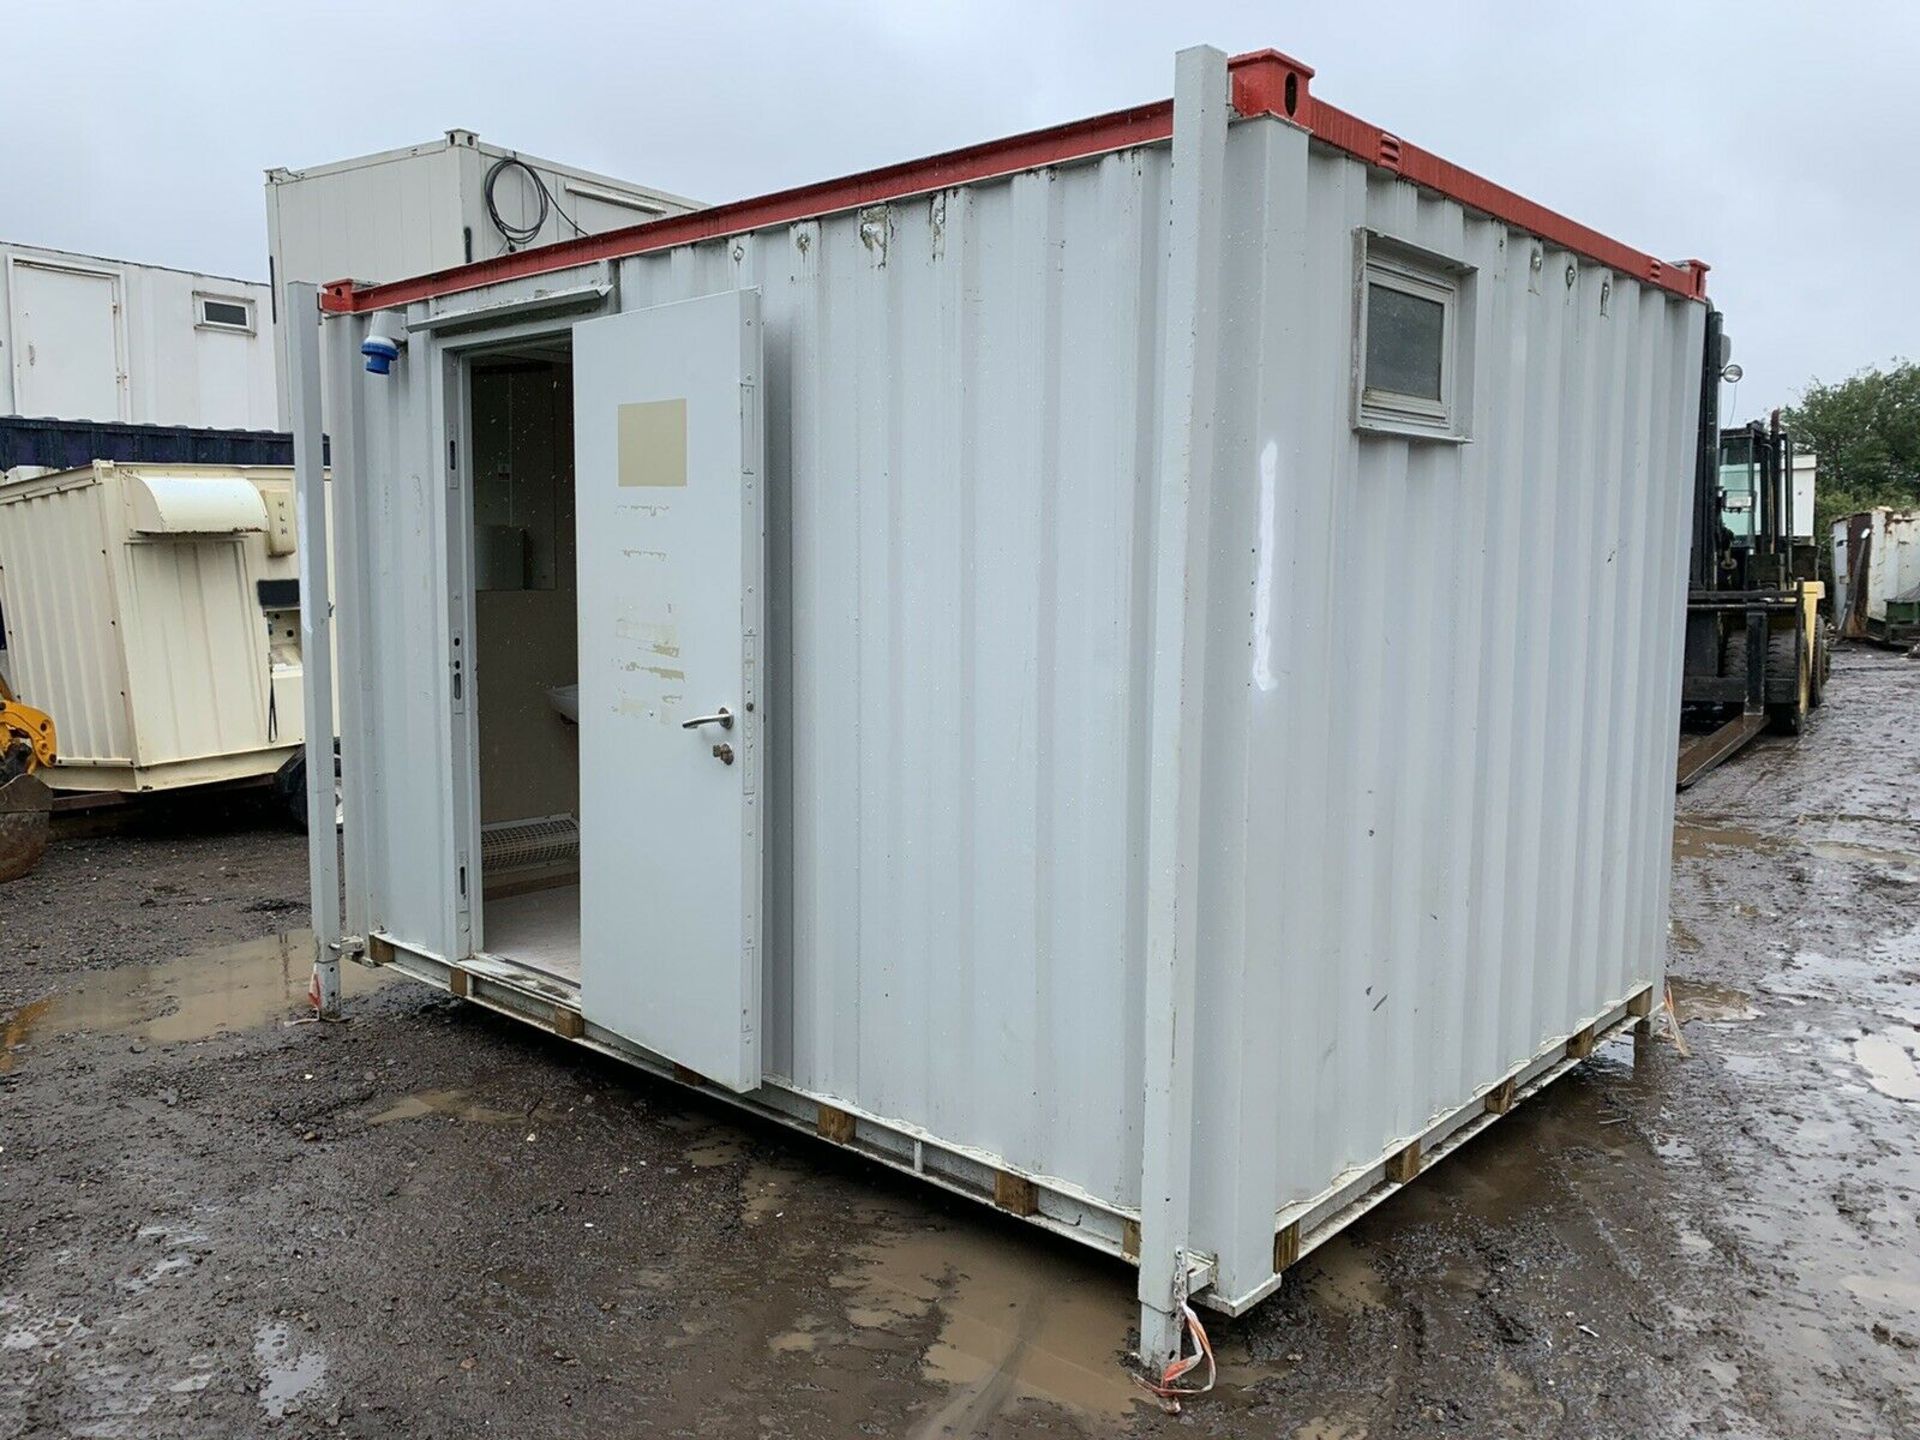 Portable Shower Drying Room With Toilets - Image 5 of 11